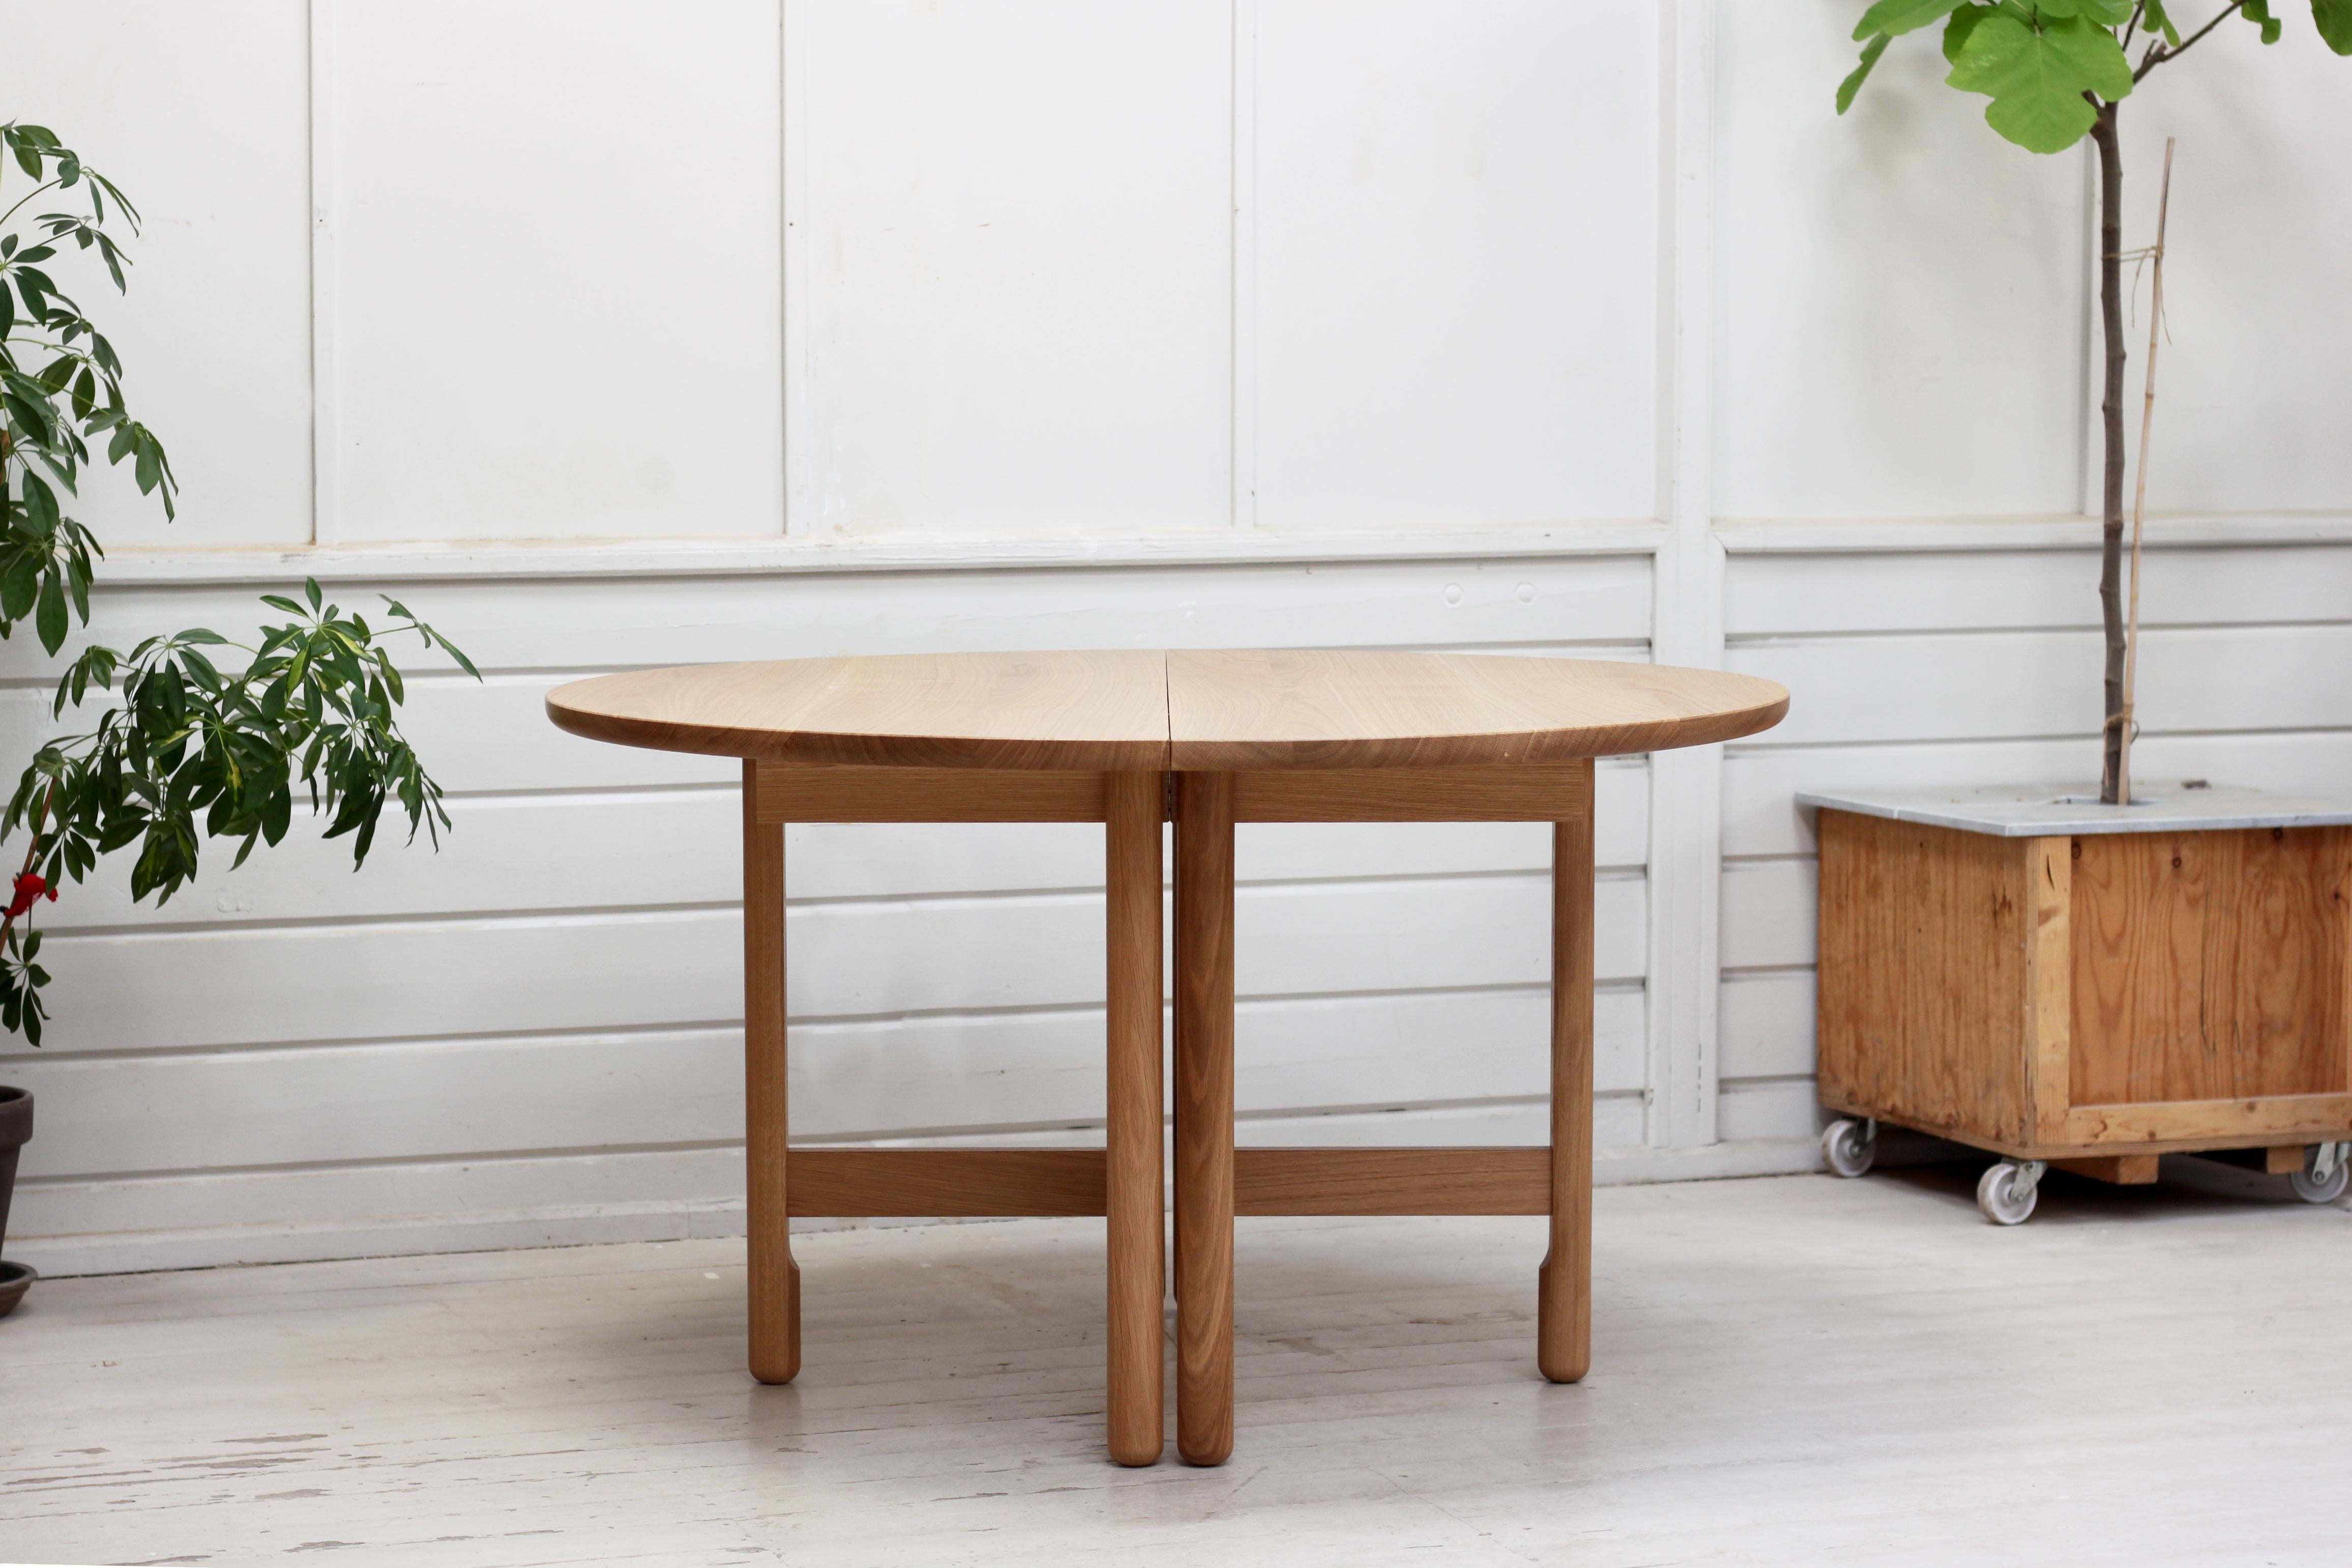 Hand-Crafted Handmade Thea Dining Table, Extendable Ø130cm - Oak - by BACD studio For Sale